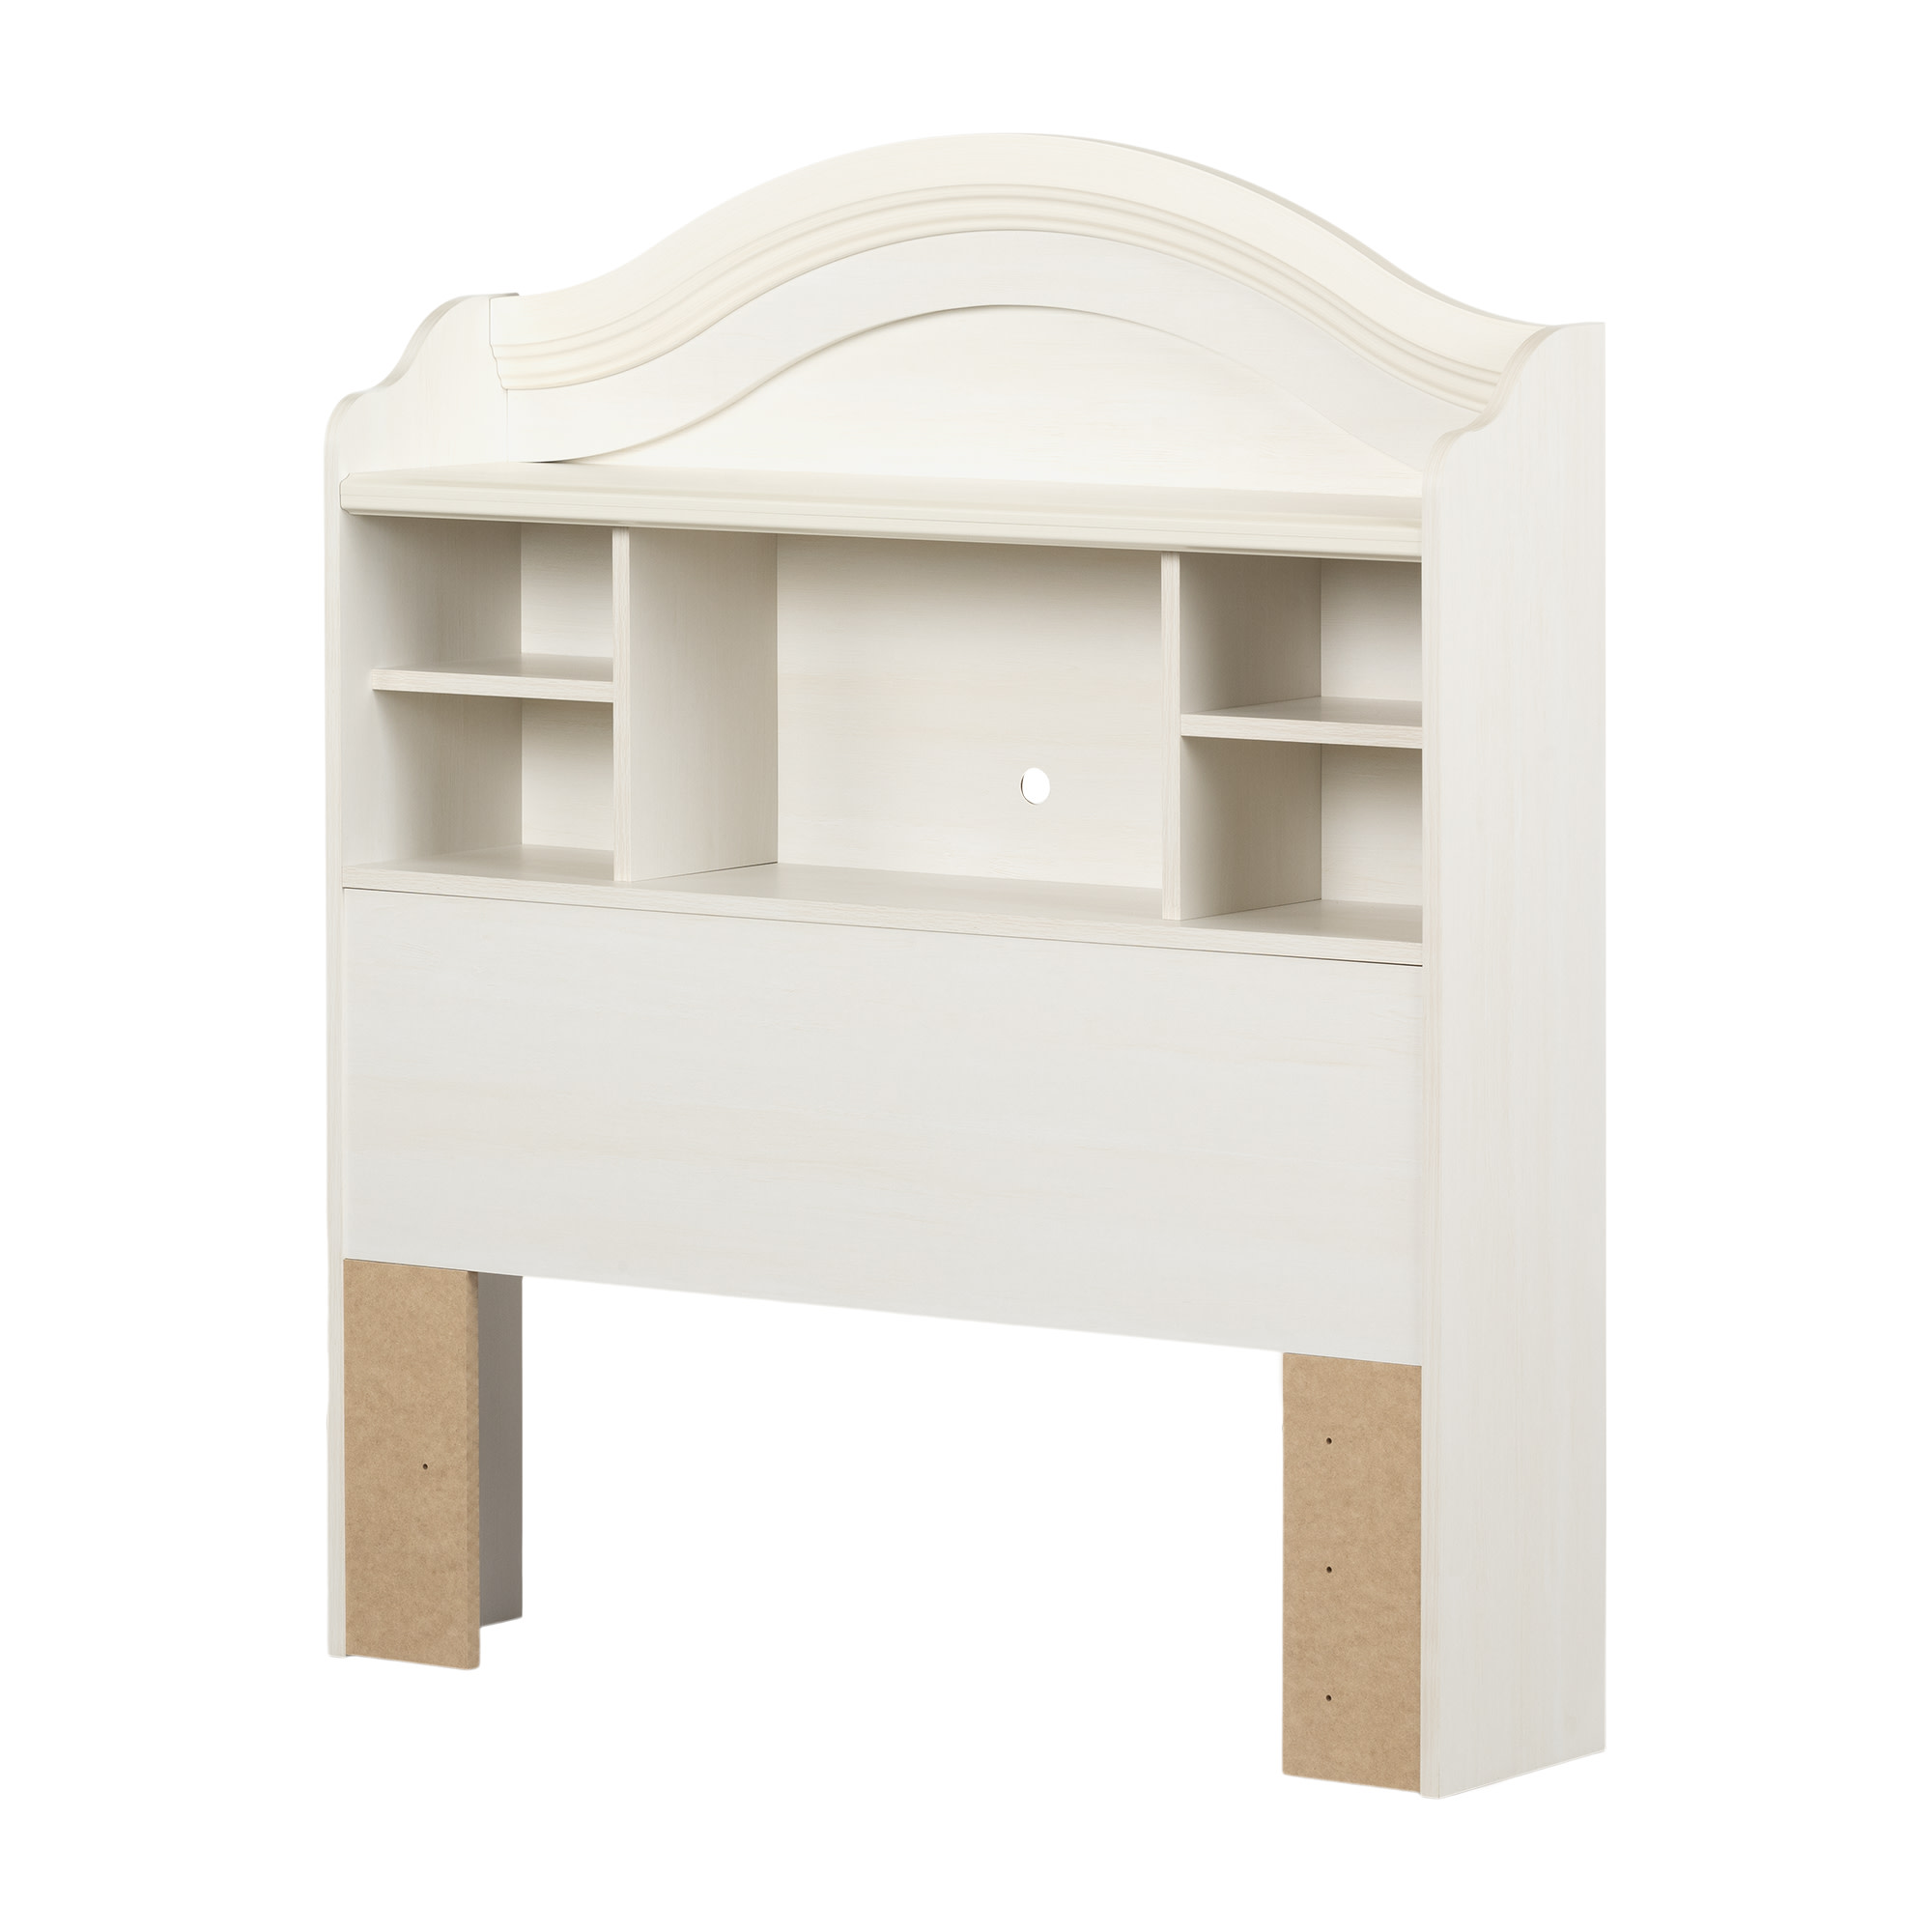 Summer Breeze Bookcase Headboard, Twin size, White Wash - image 1 of 9